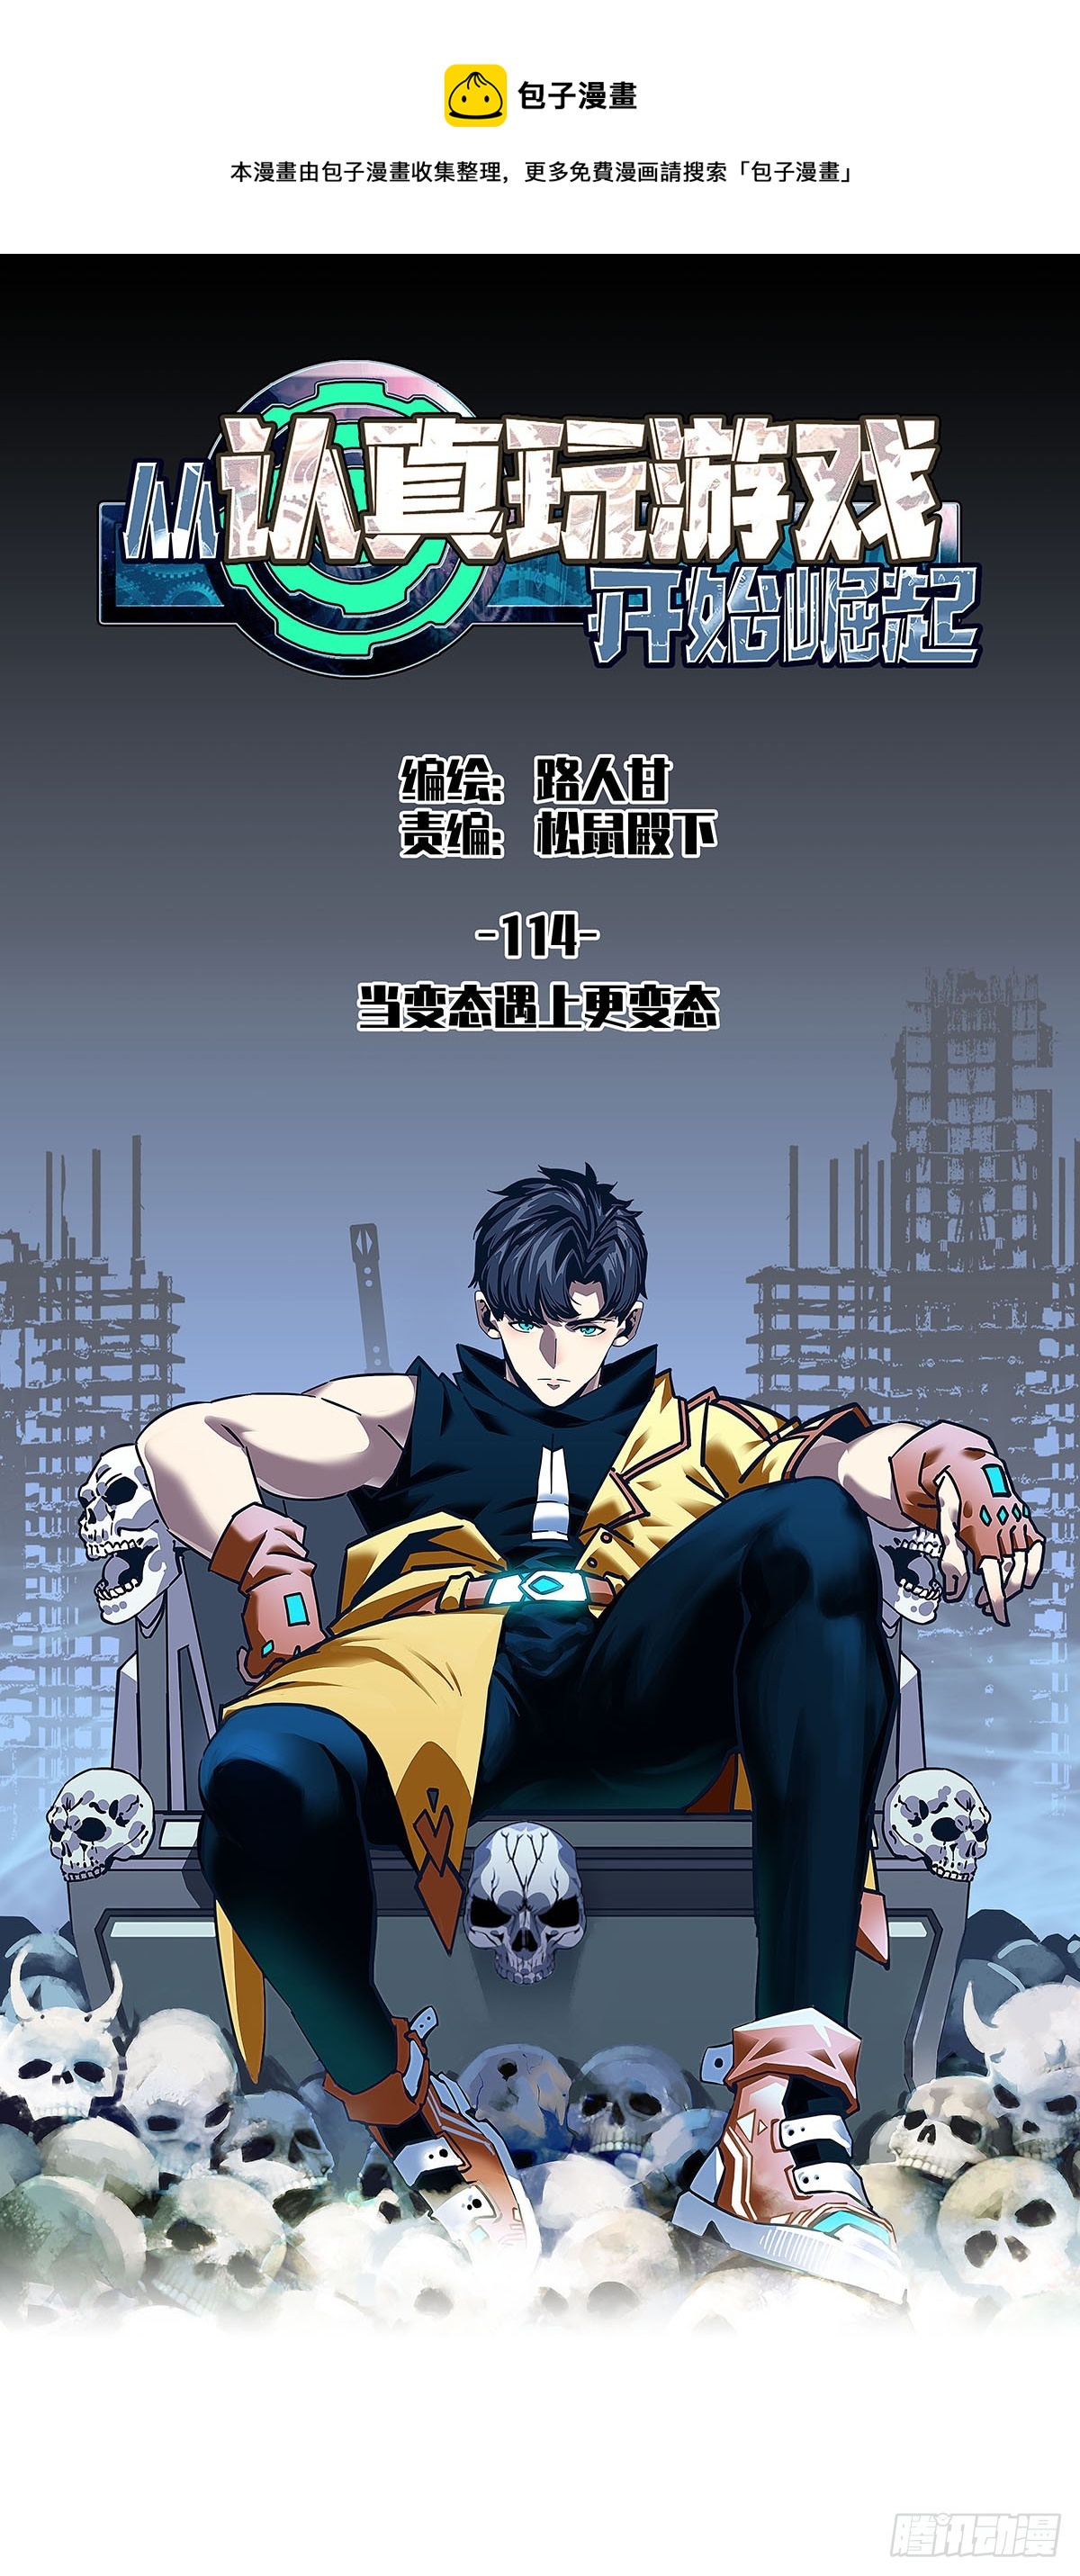 Read It All Starts With Playing Game Seriously Chapter 113 - Manganelo